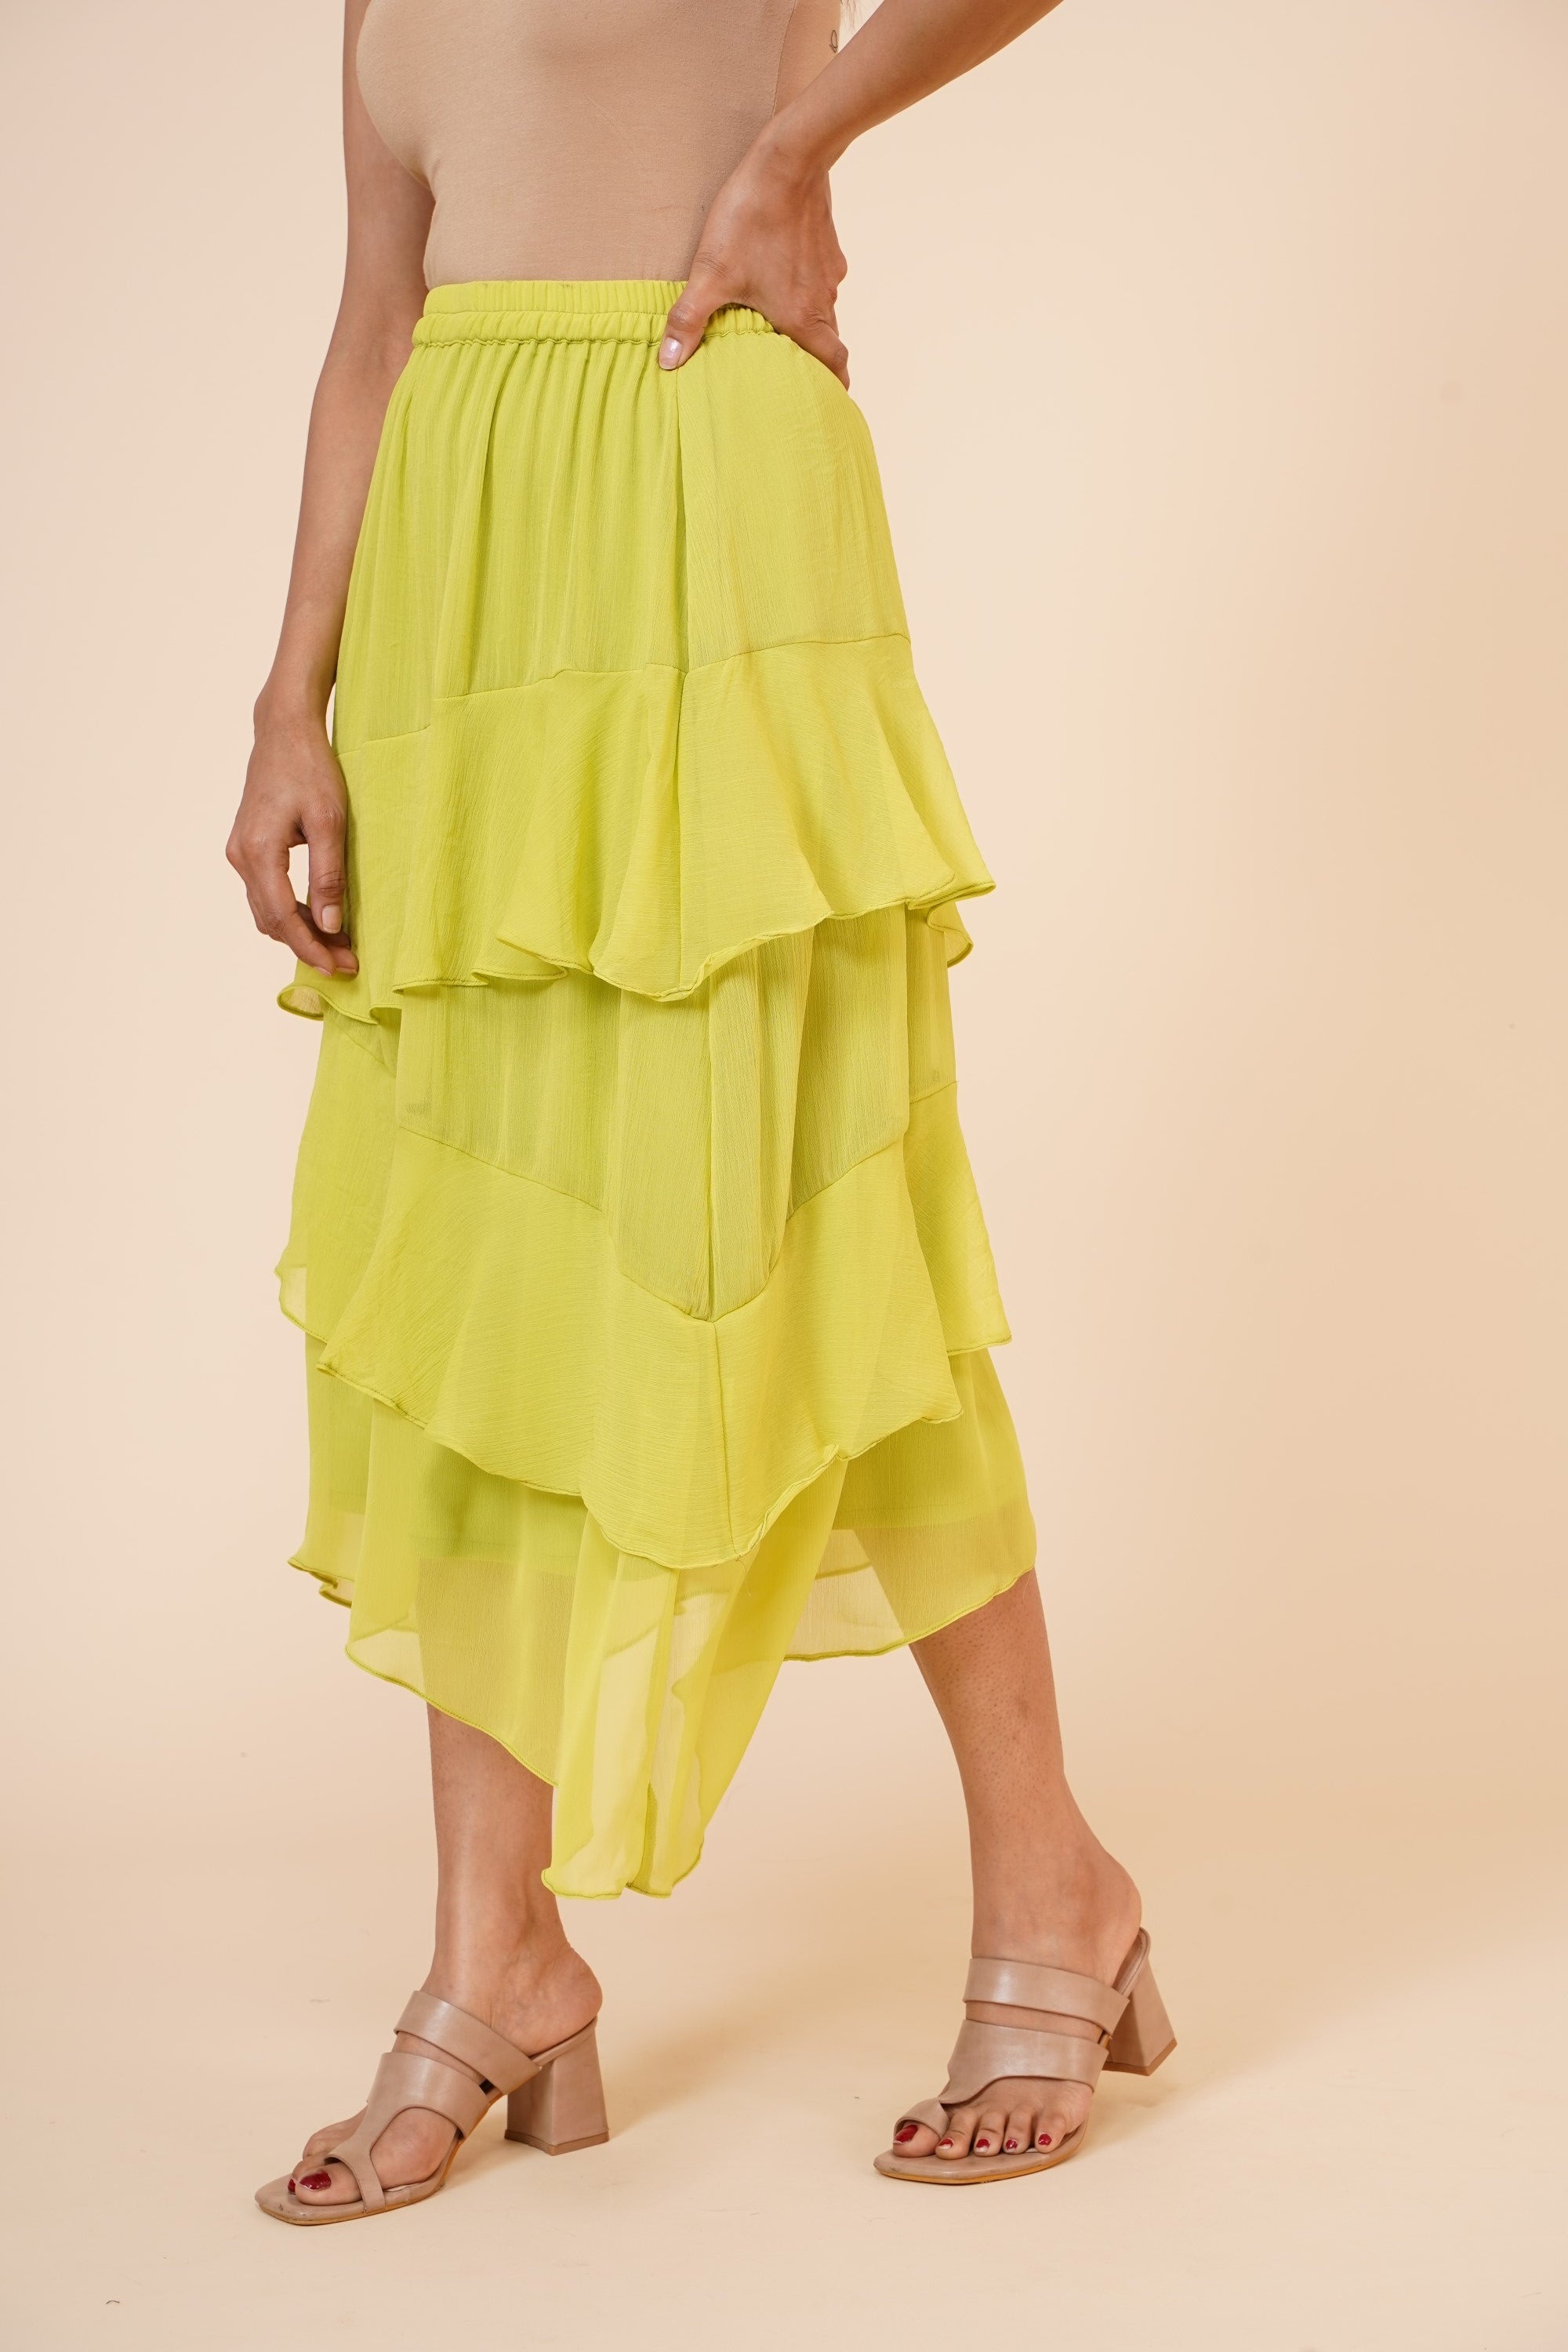 Women's Chiffon Ruffle Skirt With Elastic In Lime Green - MIRACOLOS by Ruchi